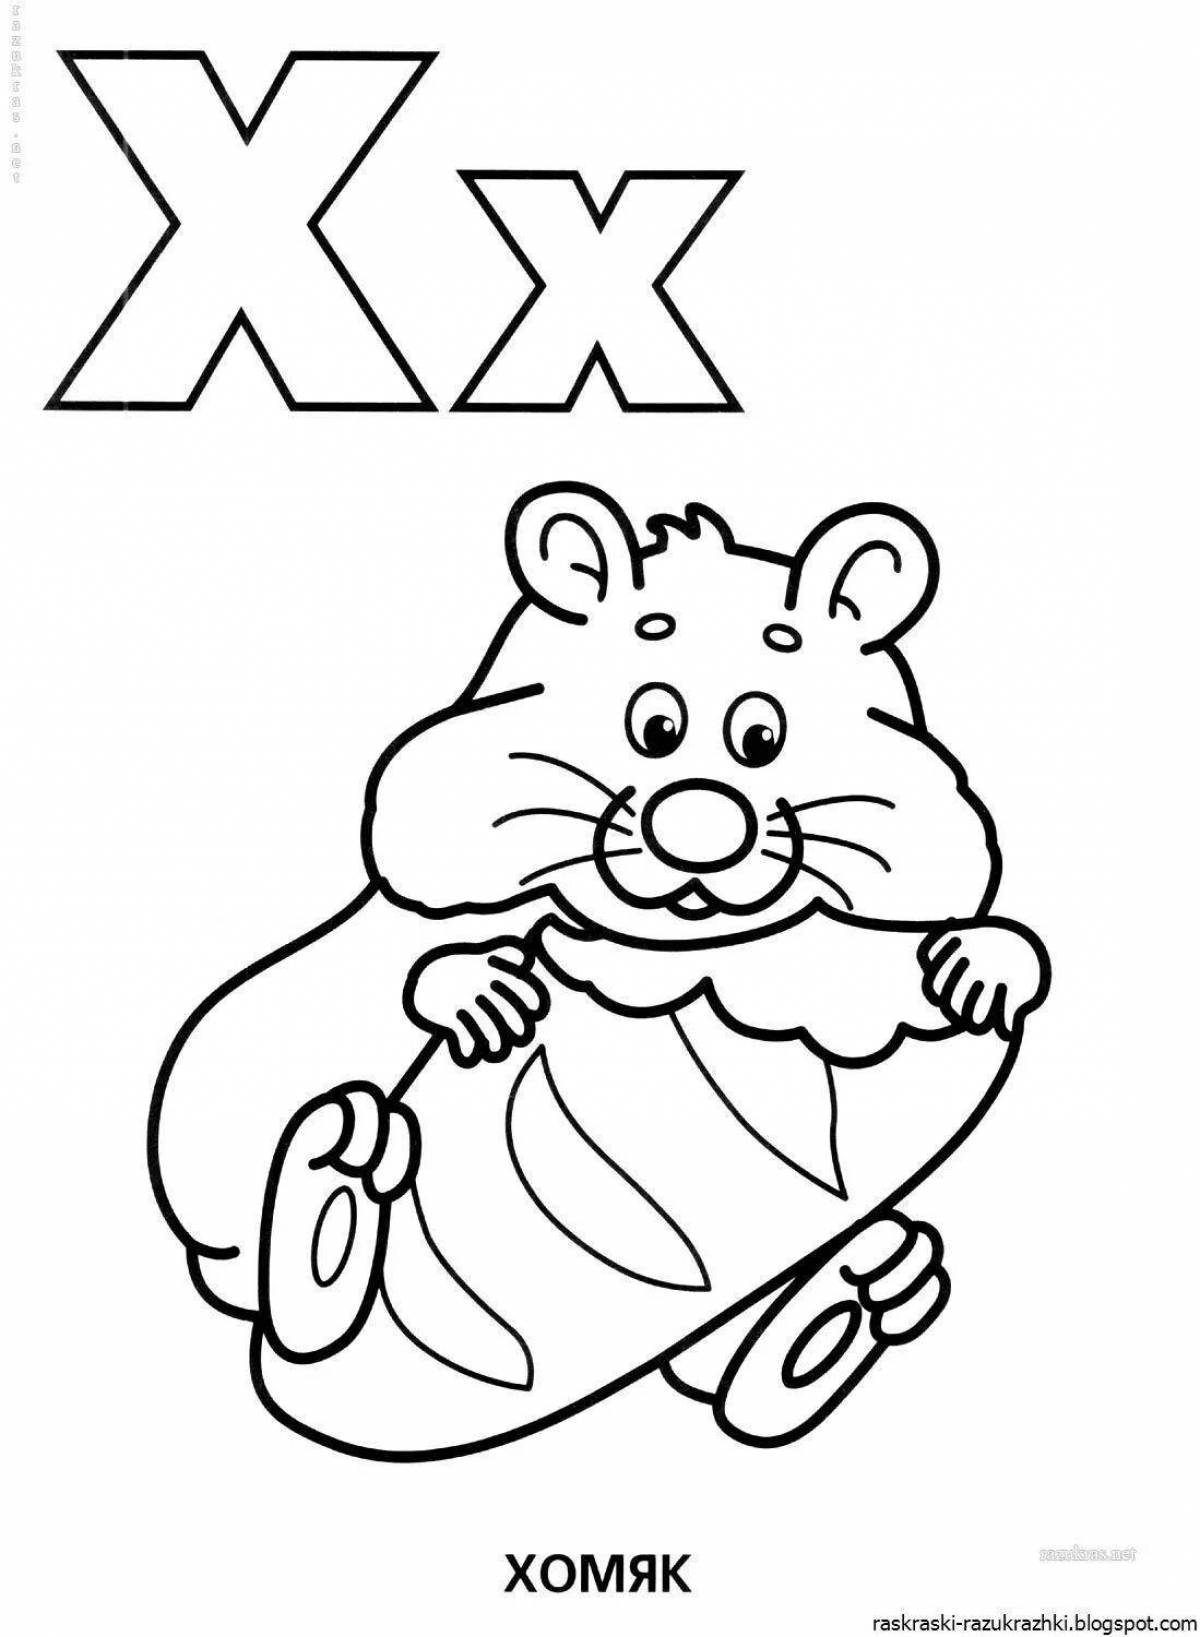 Coloring page elegant xylophone